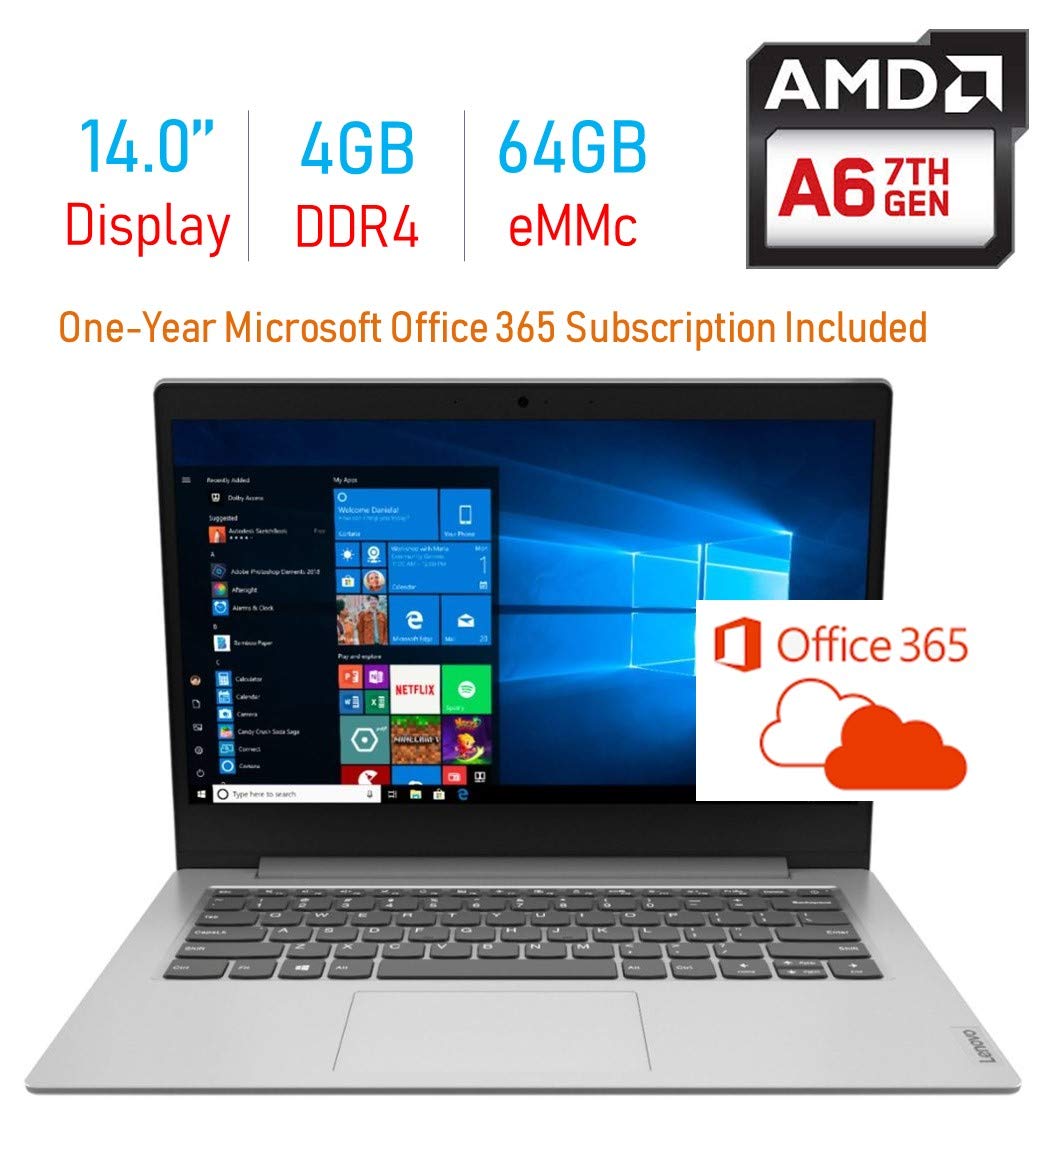 Lenovo IdeaPad 14.0-inch Laptop PC, 7th Gen AMD A6-9220e up to 2.4GHz, 4GB RAM, 64GB Flash Storage, HDMI, WiFi, Bluetooth, AMD Radeon R4, One-Year Office 365 Included, Up to 8Hrs Battery, Windows 10